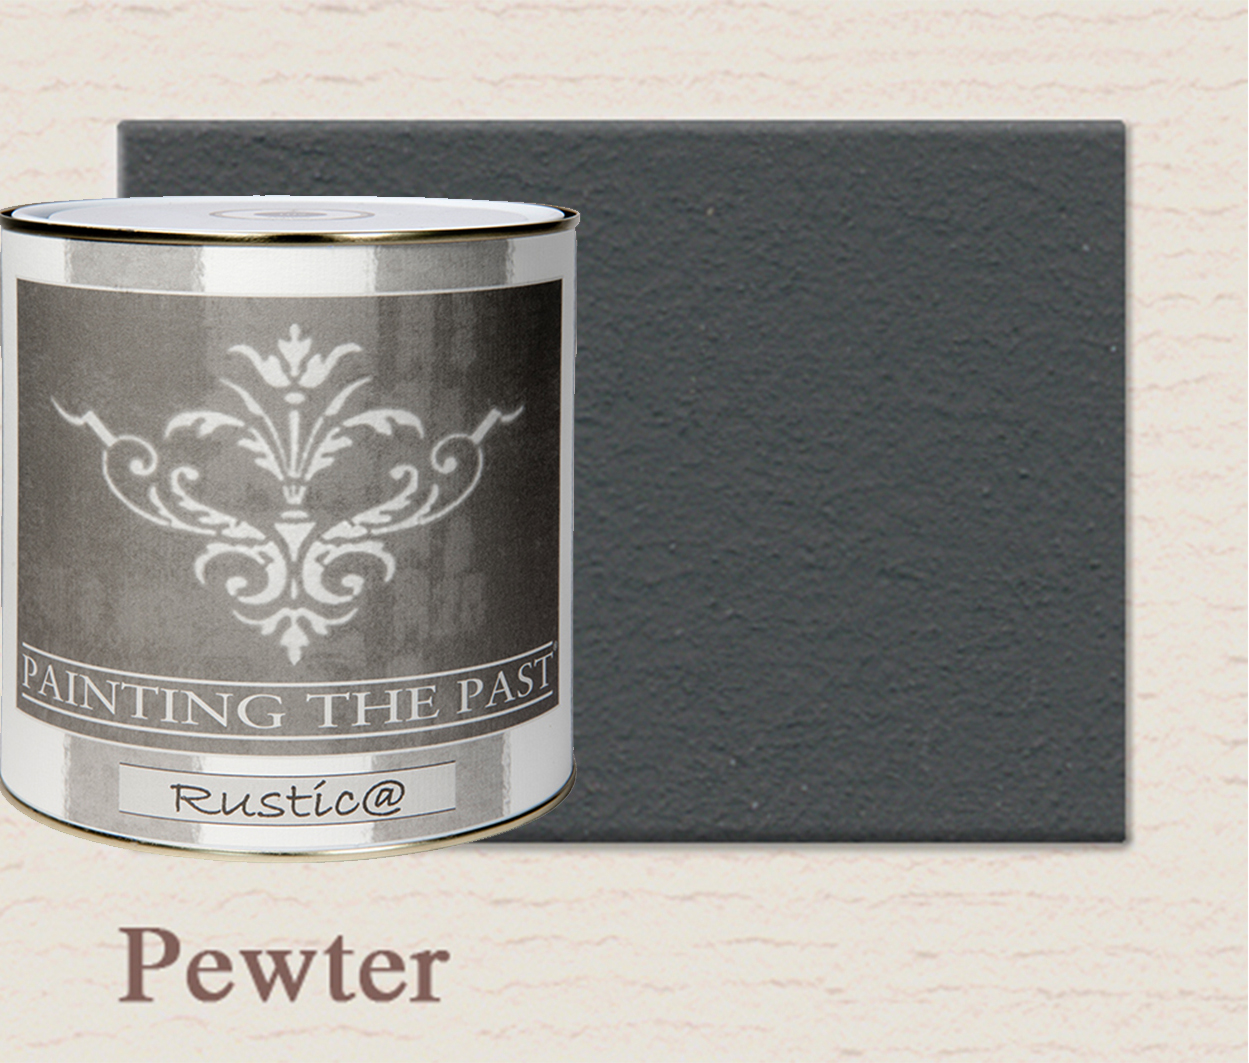 Painting The Past Rustica Pewter